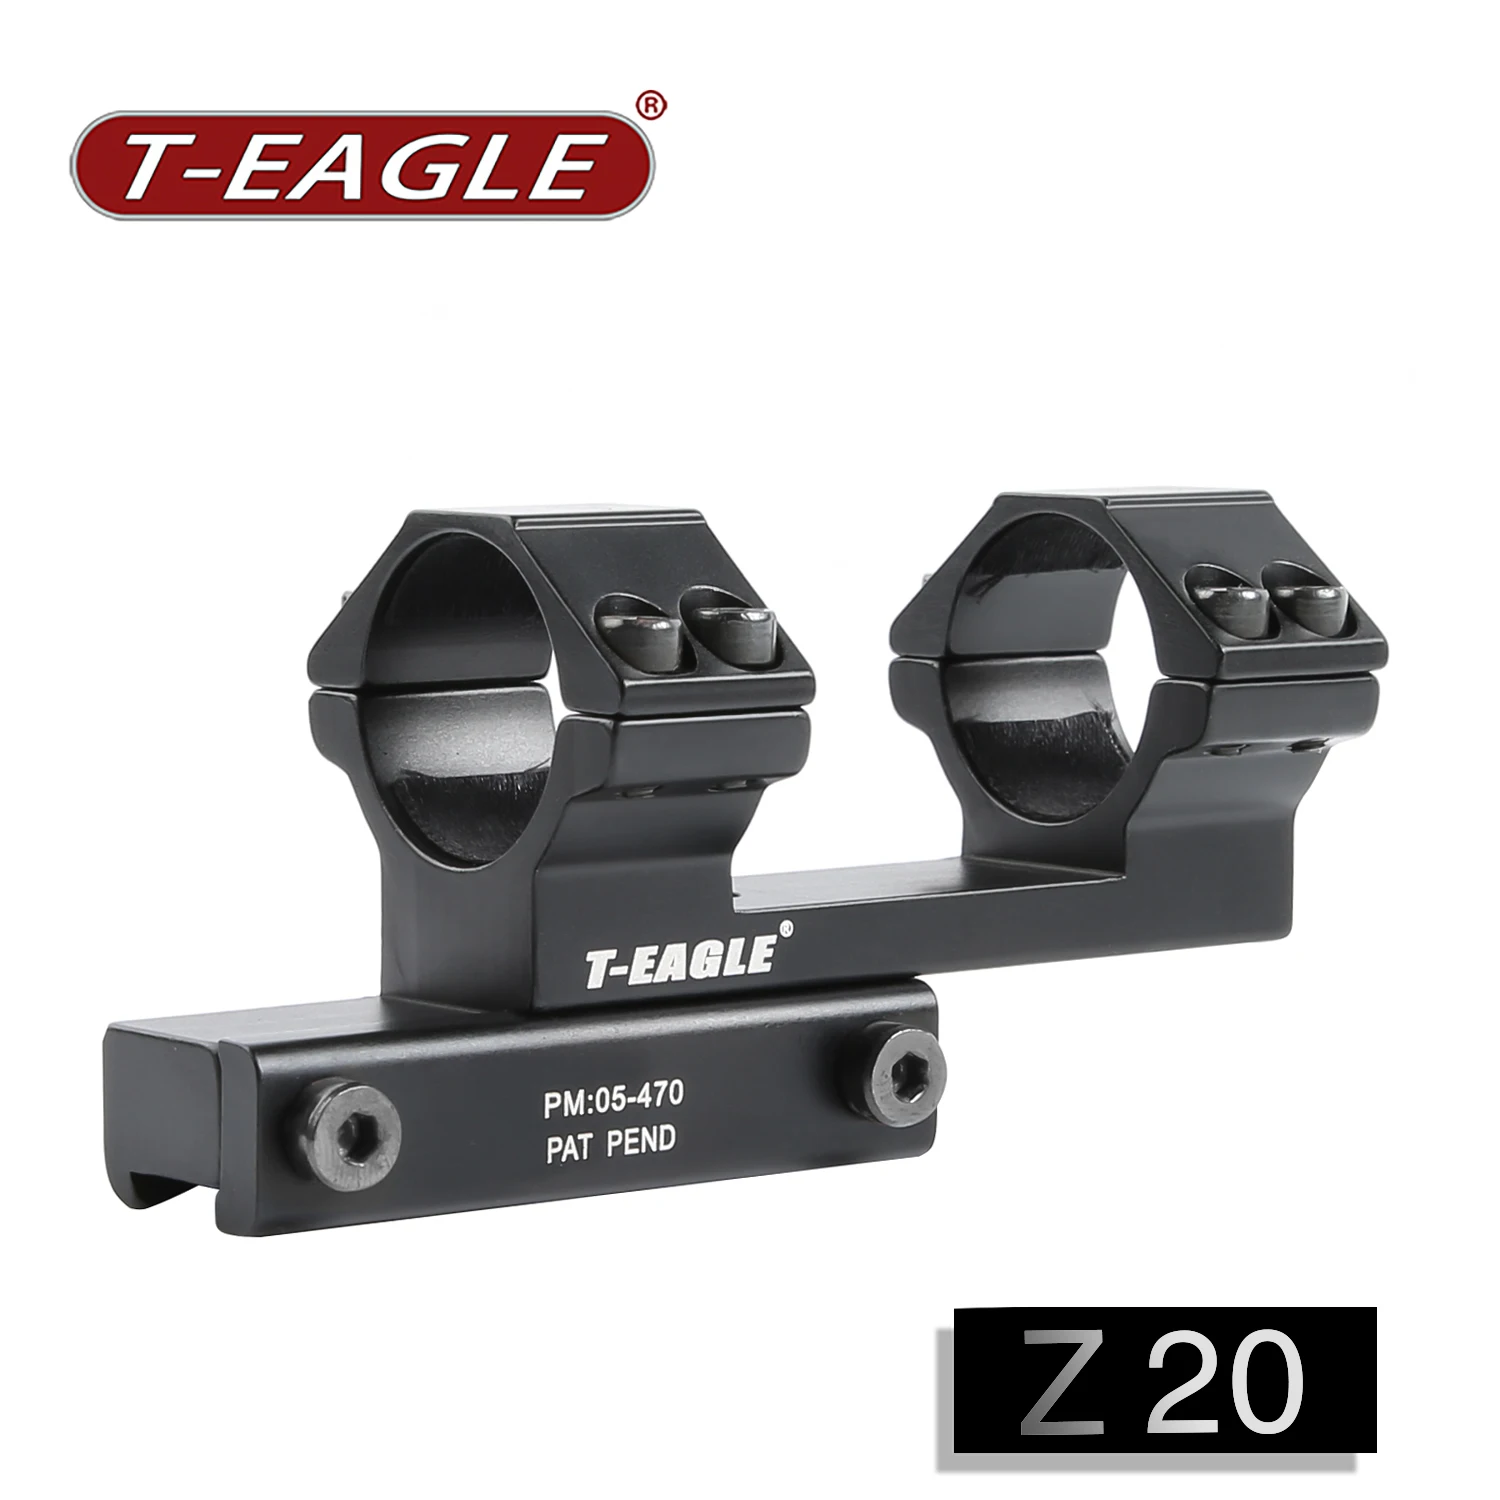 

T-EAGLE 25.4/30mm 5588/5088 11/20mm mounts ring with Spring instrument Riflescope dovetail rail high Low Profile for huntiing